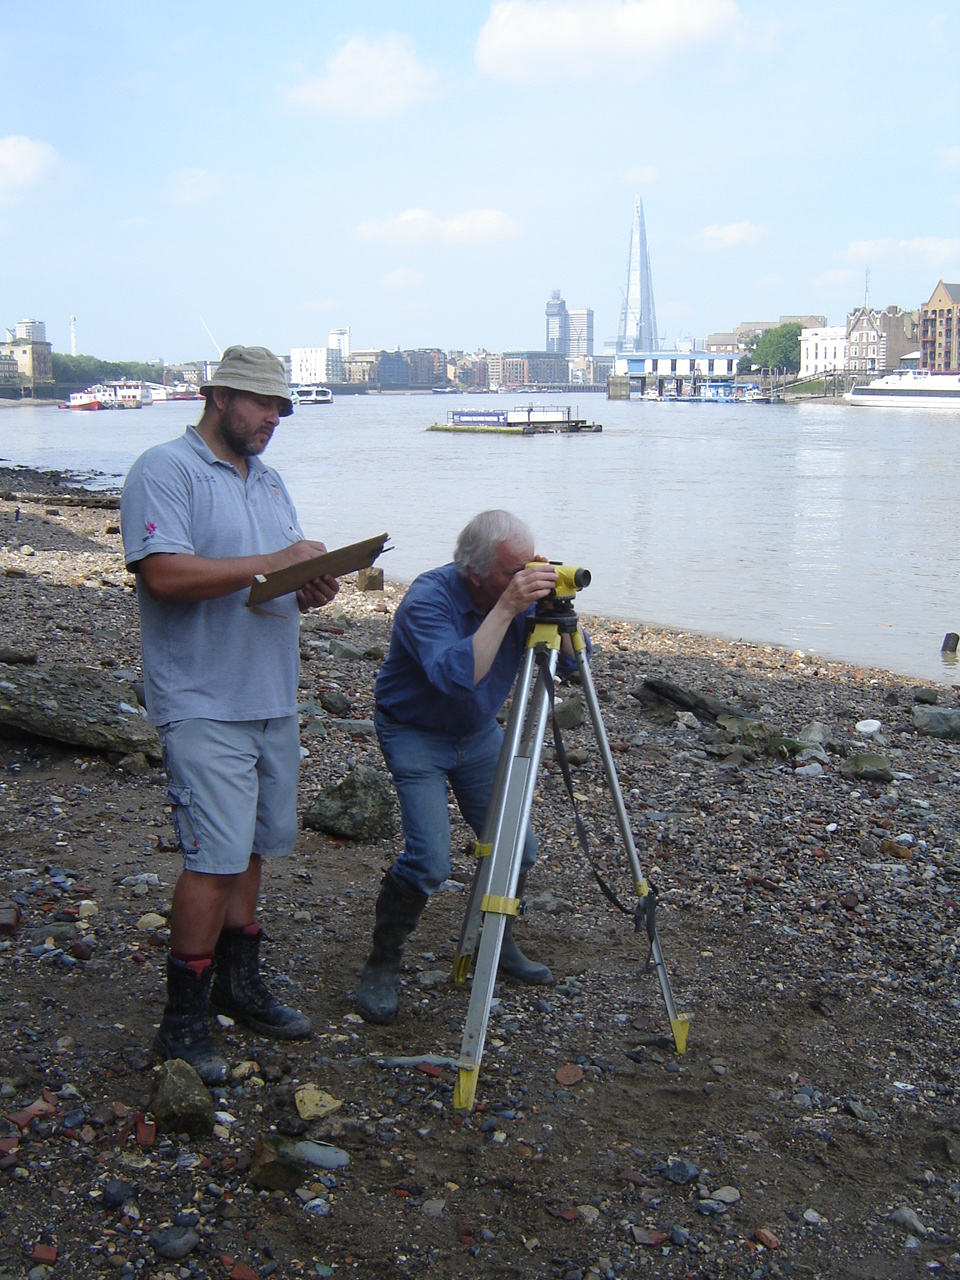 Surveying on an Intertidal Site at Rotherhithe on the River Thames